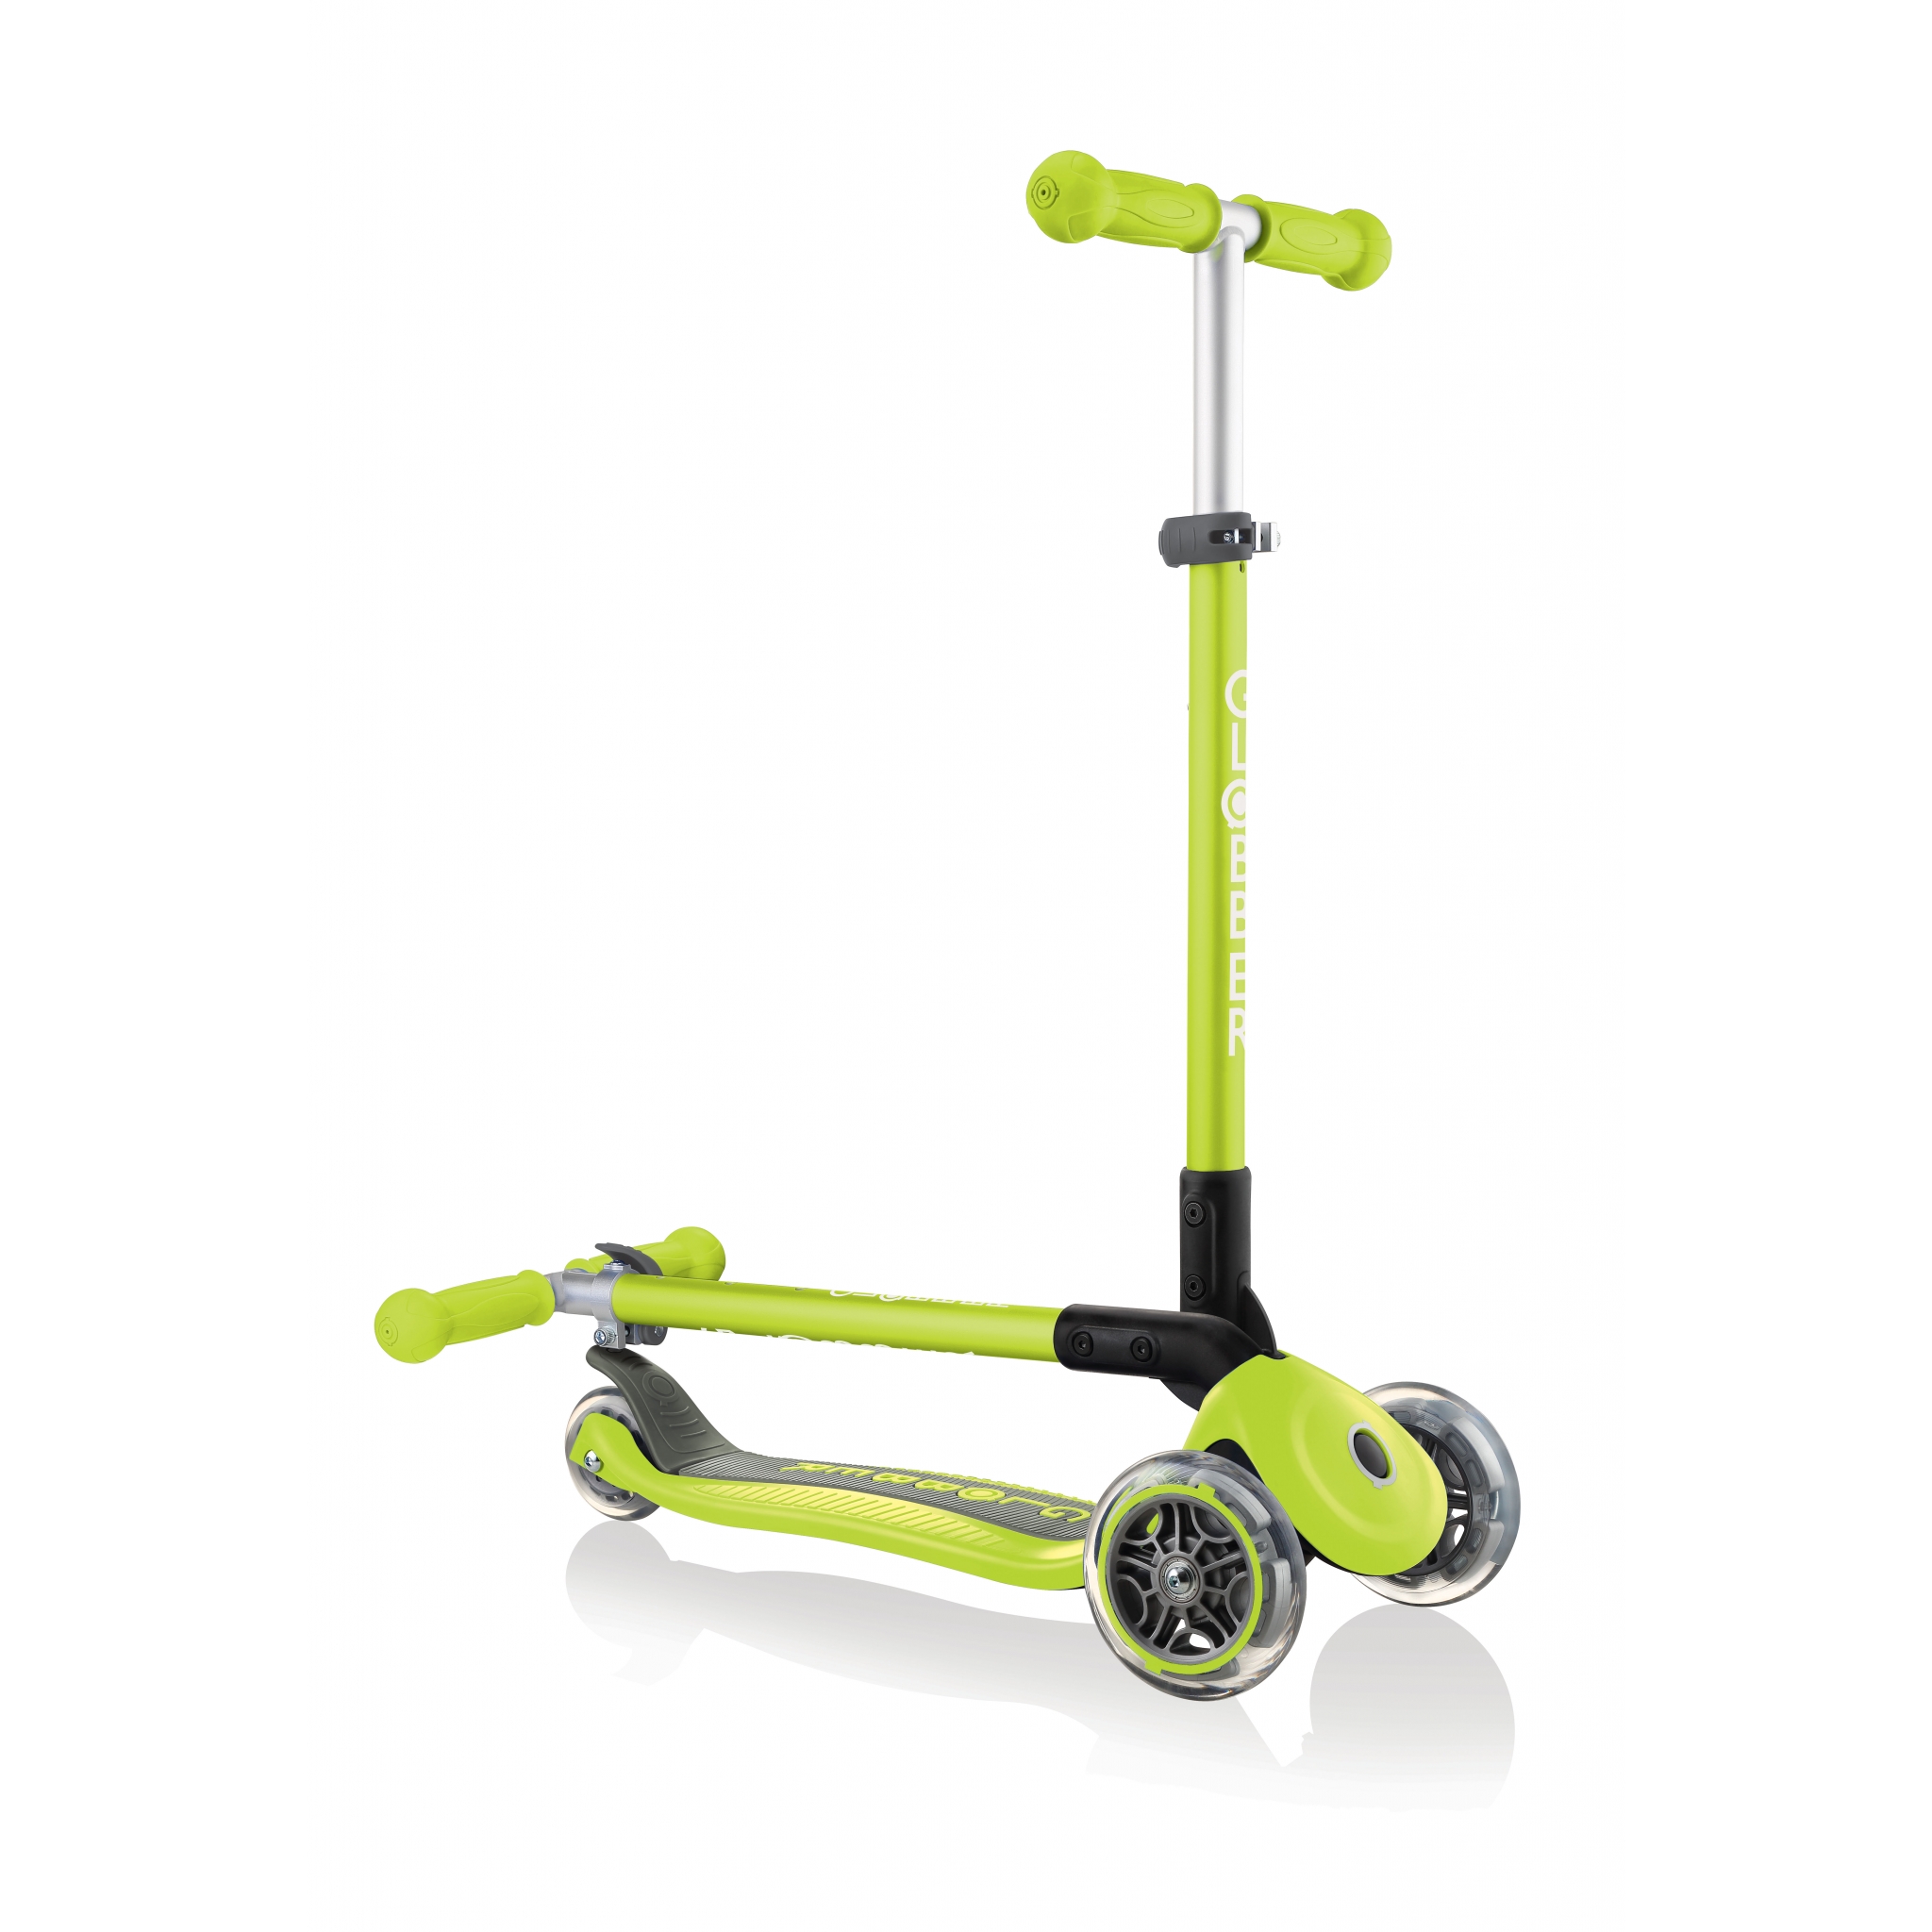 PRIMO-FOLDABLE-3-wheel-fold-up-scooter-for-kids-lime-green 0